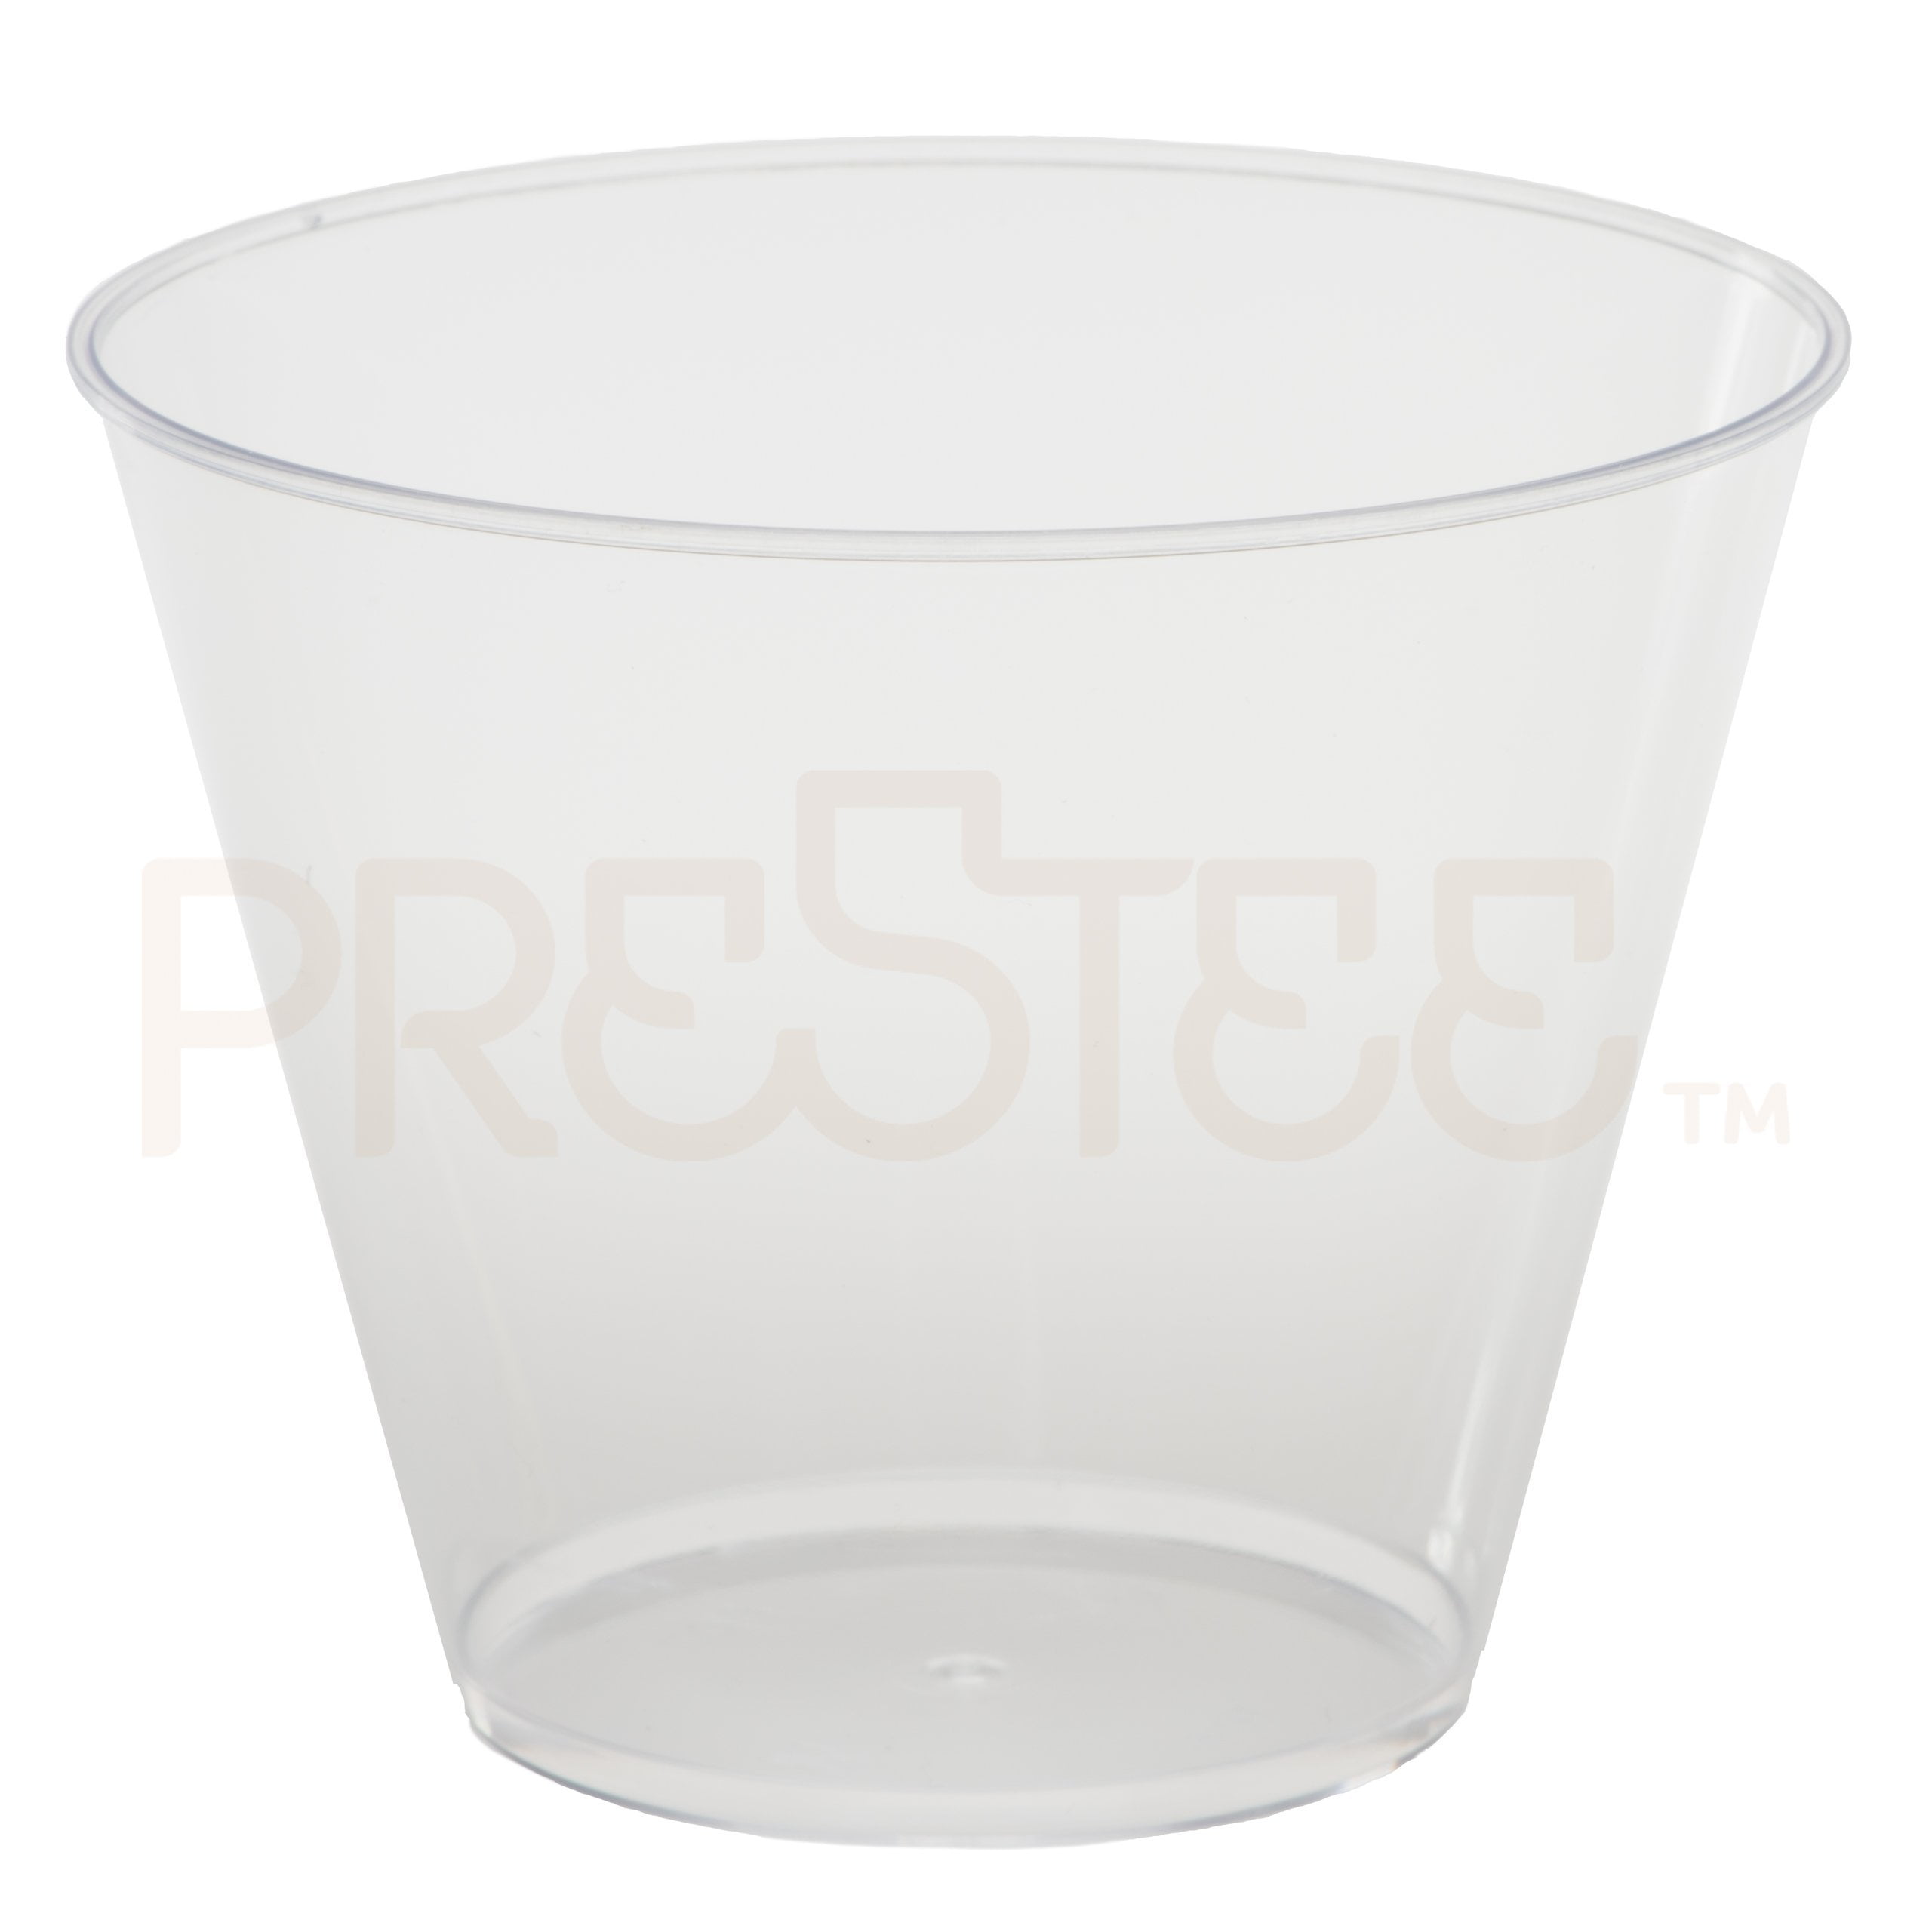 Clear Plastic Cups - Pack of 200 Bulk, 3 oz Disposable Drink Cups, Small  Plastic Party Cup for Drink…See more Clear Plastic Cups - Pack of 200 Bulk,  3